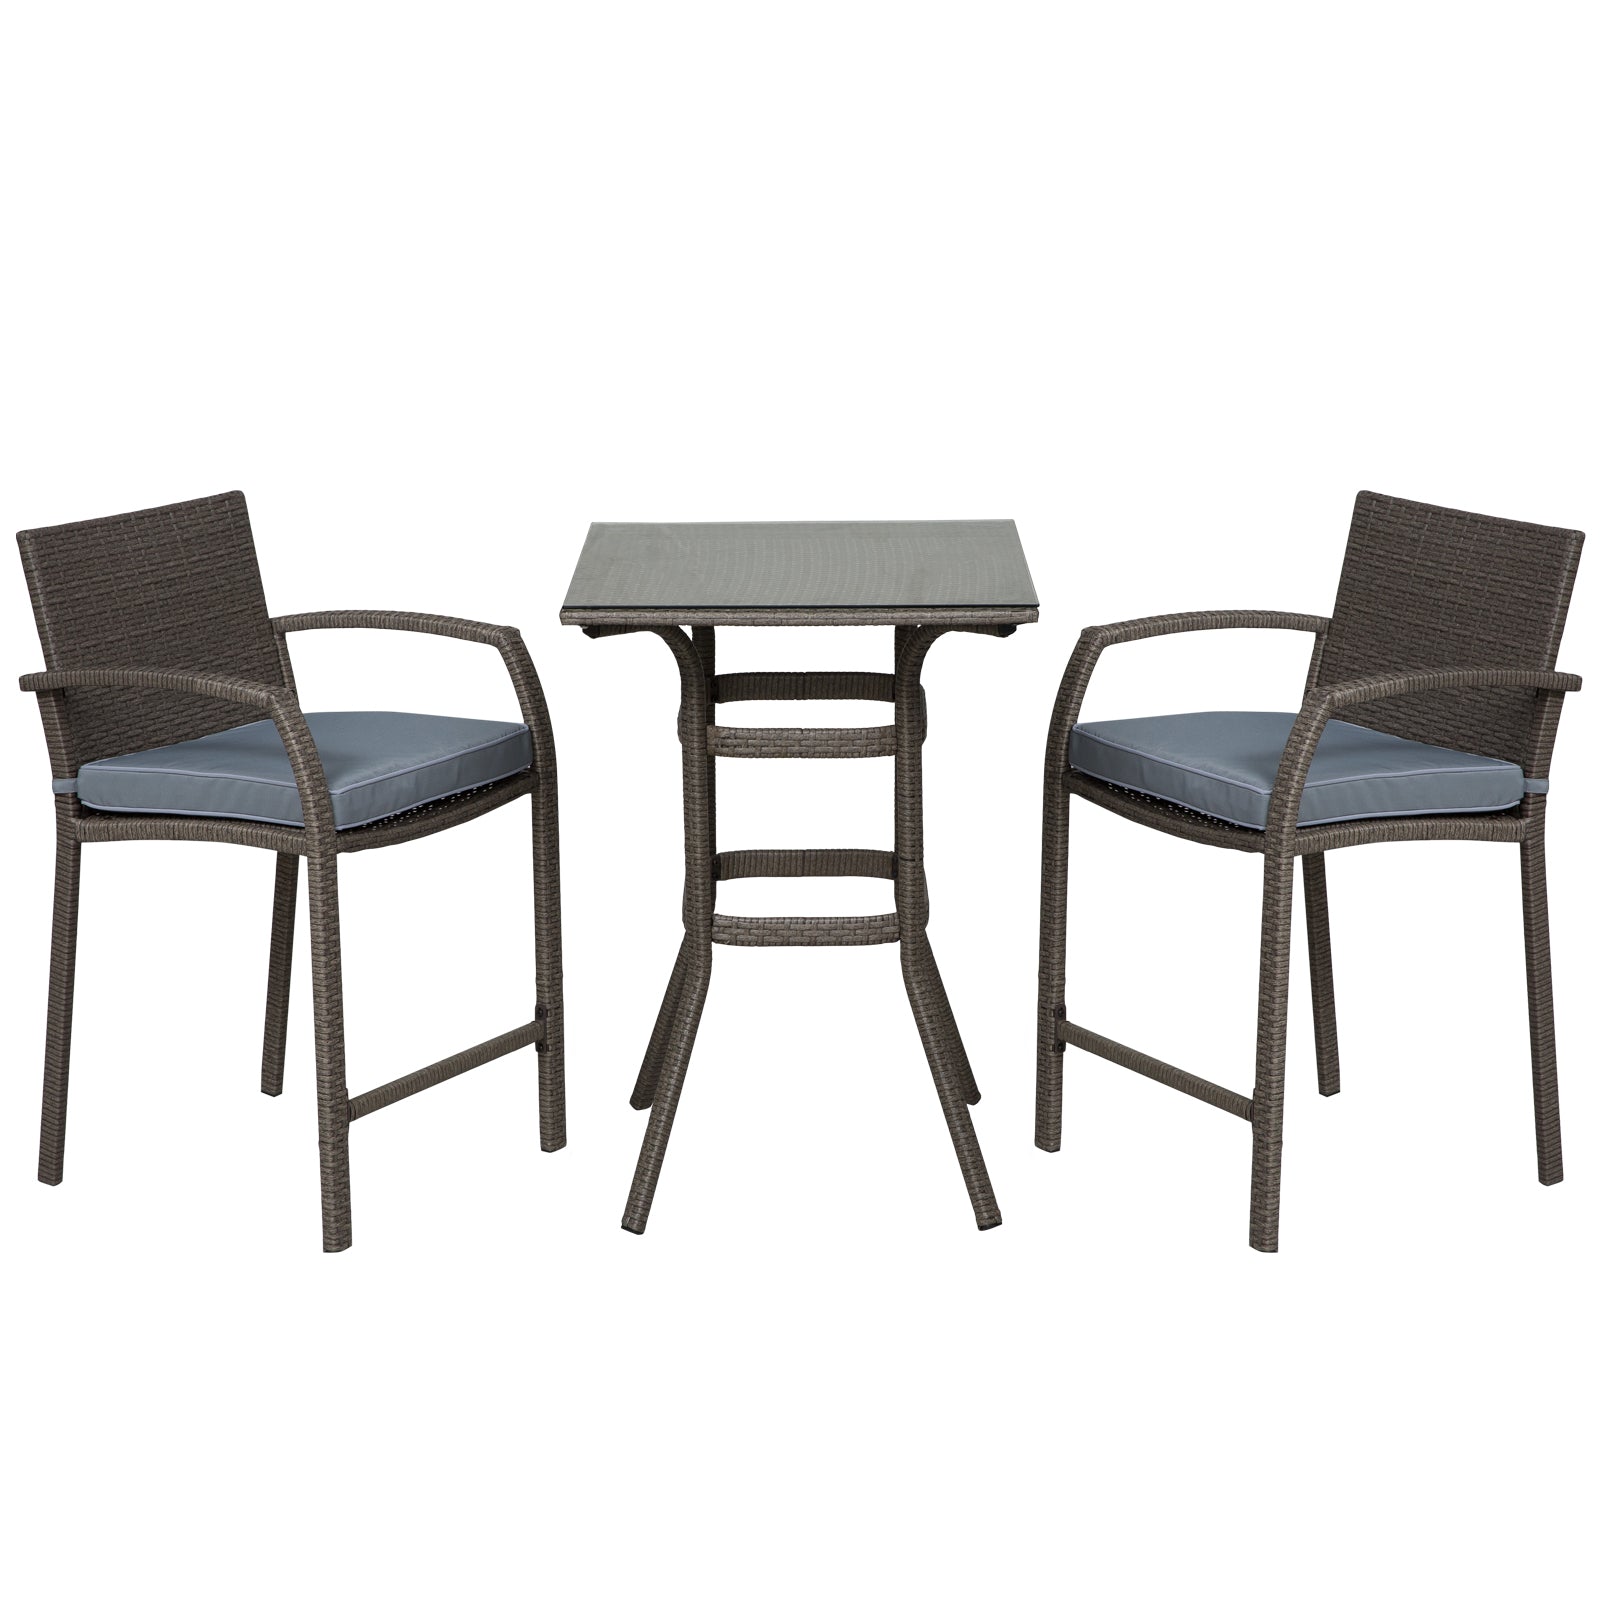 3 Pieces Patio Bar Set Wicker Garden Bistro Set Outdoor Furniture PE Rattan Table and Stools with Seat Cushion, Grey - Gallery Canada